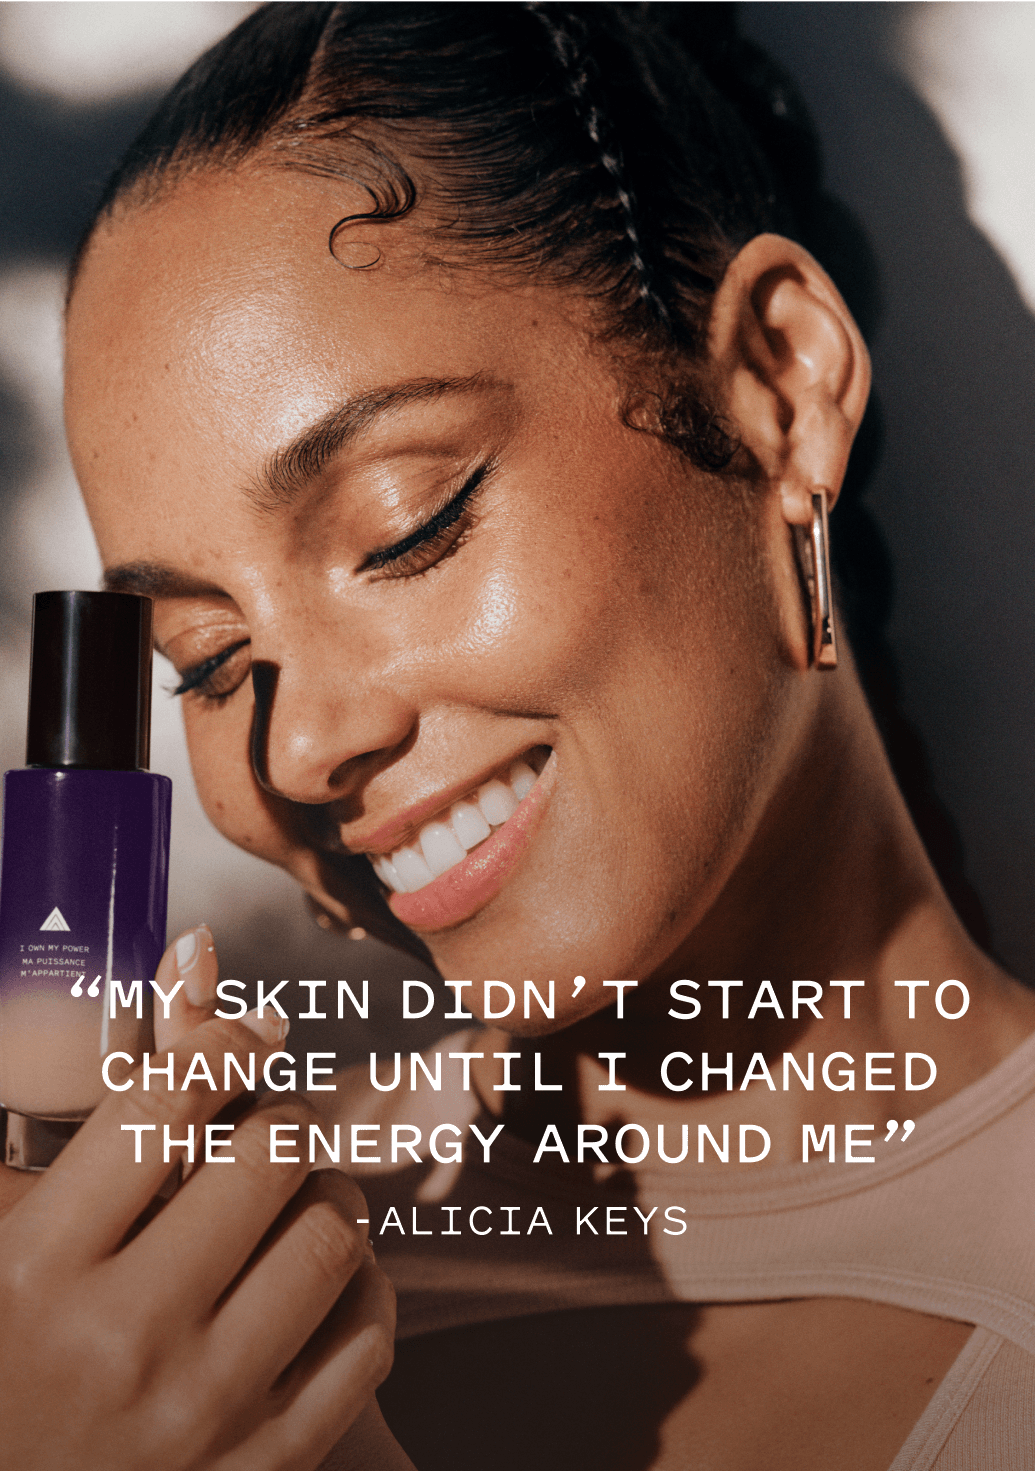 My skin didn’t start to change until I changed the energy around me -Alicia Keys